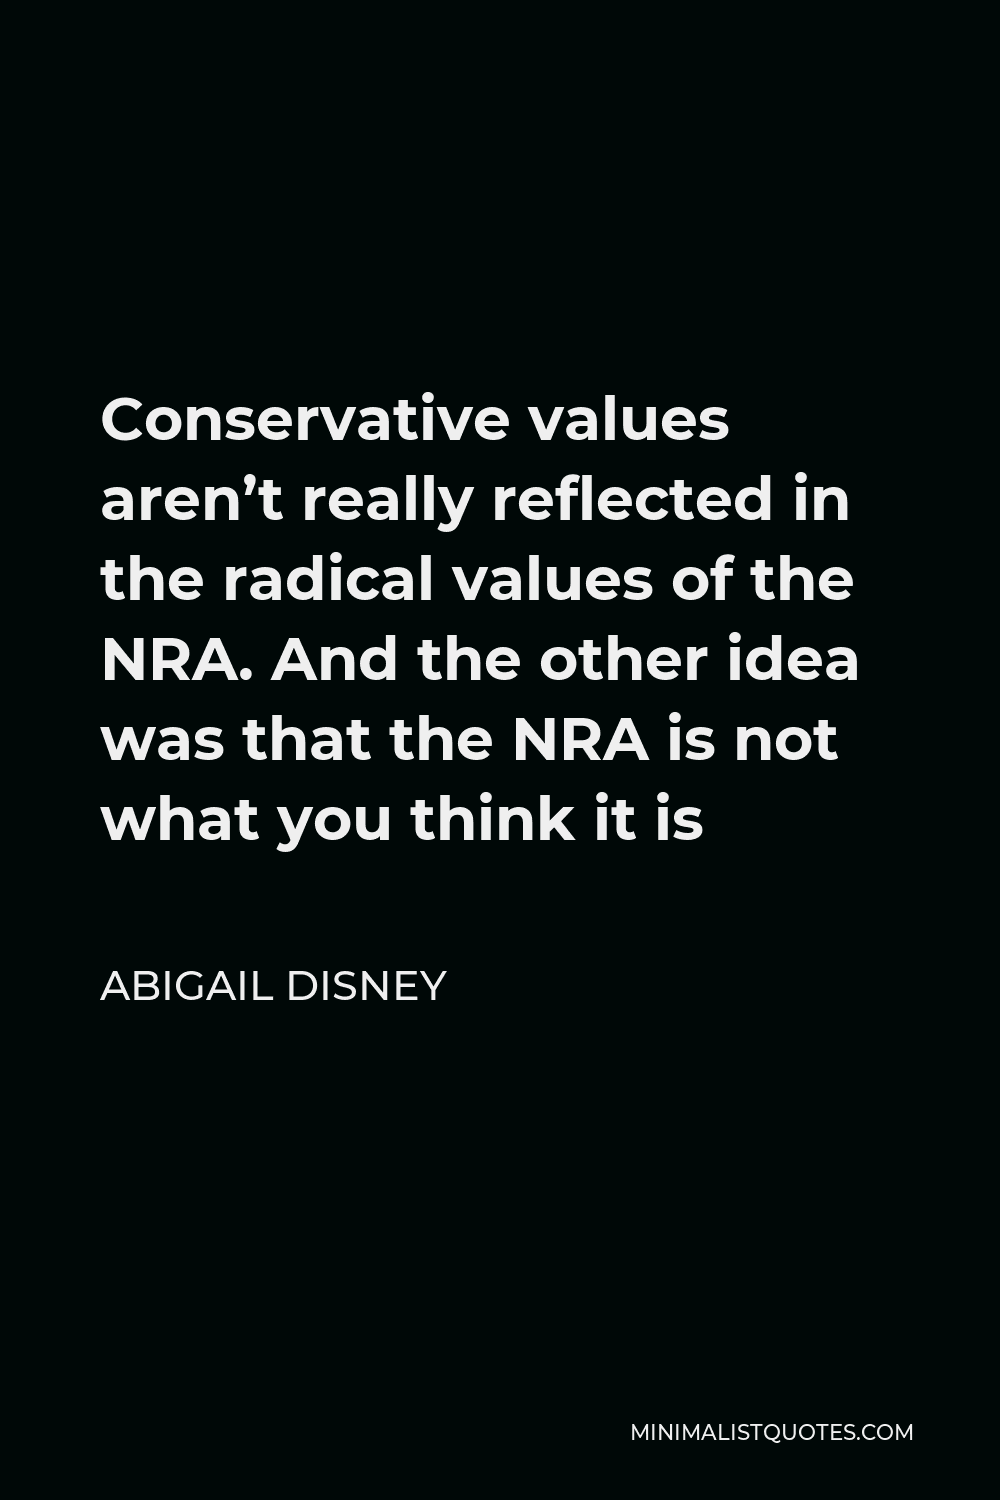 Abigail Disney Quote - Conservative values aren’t really reflected in the radical values of the NRA. And the other idea was that the NRA is not what you think it is